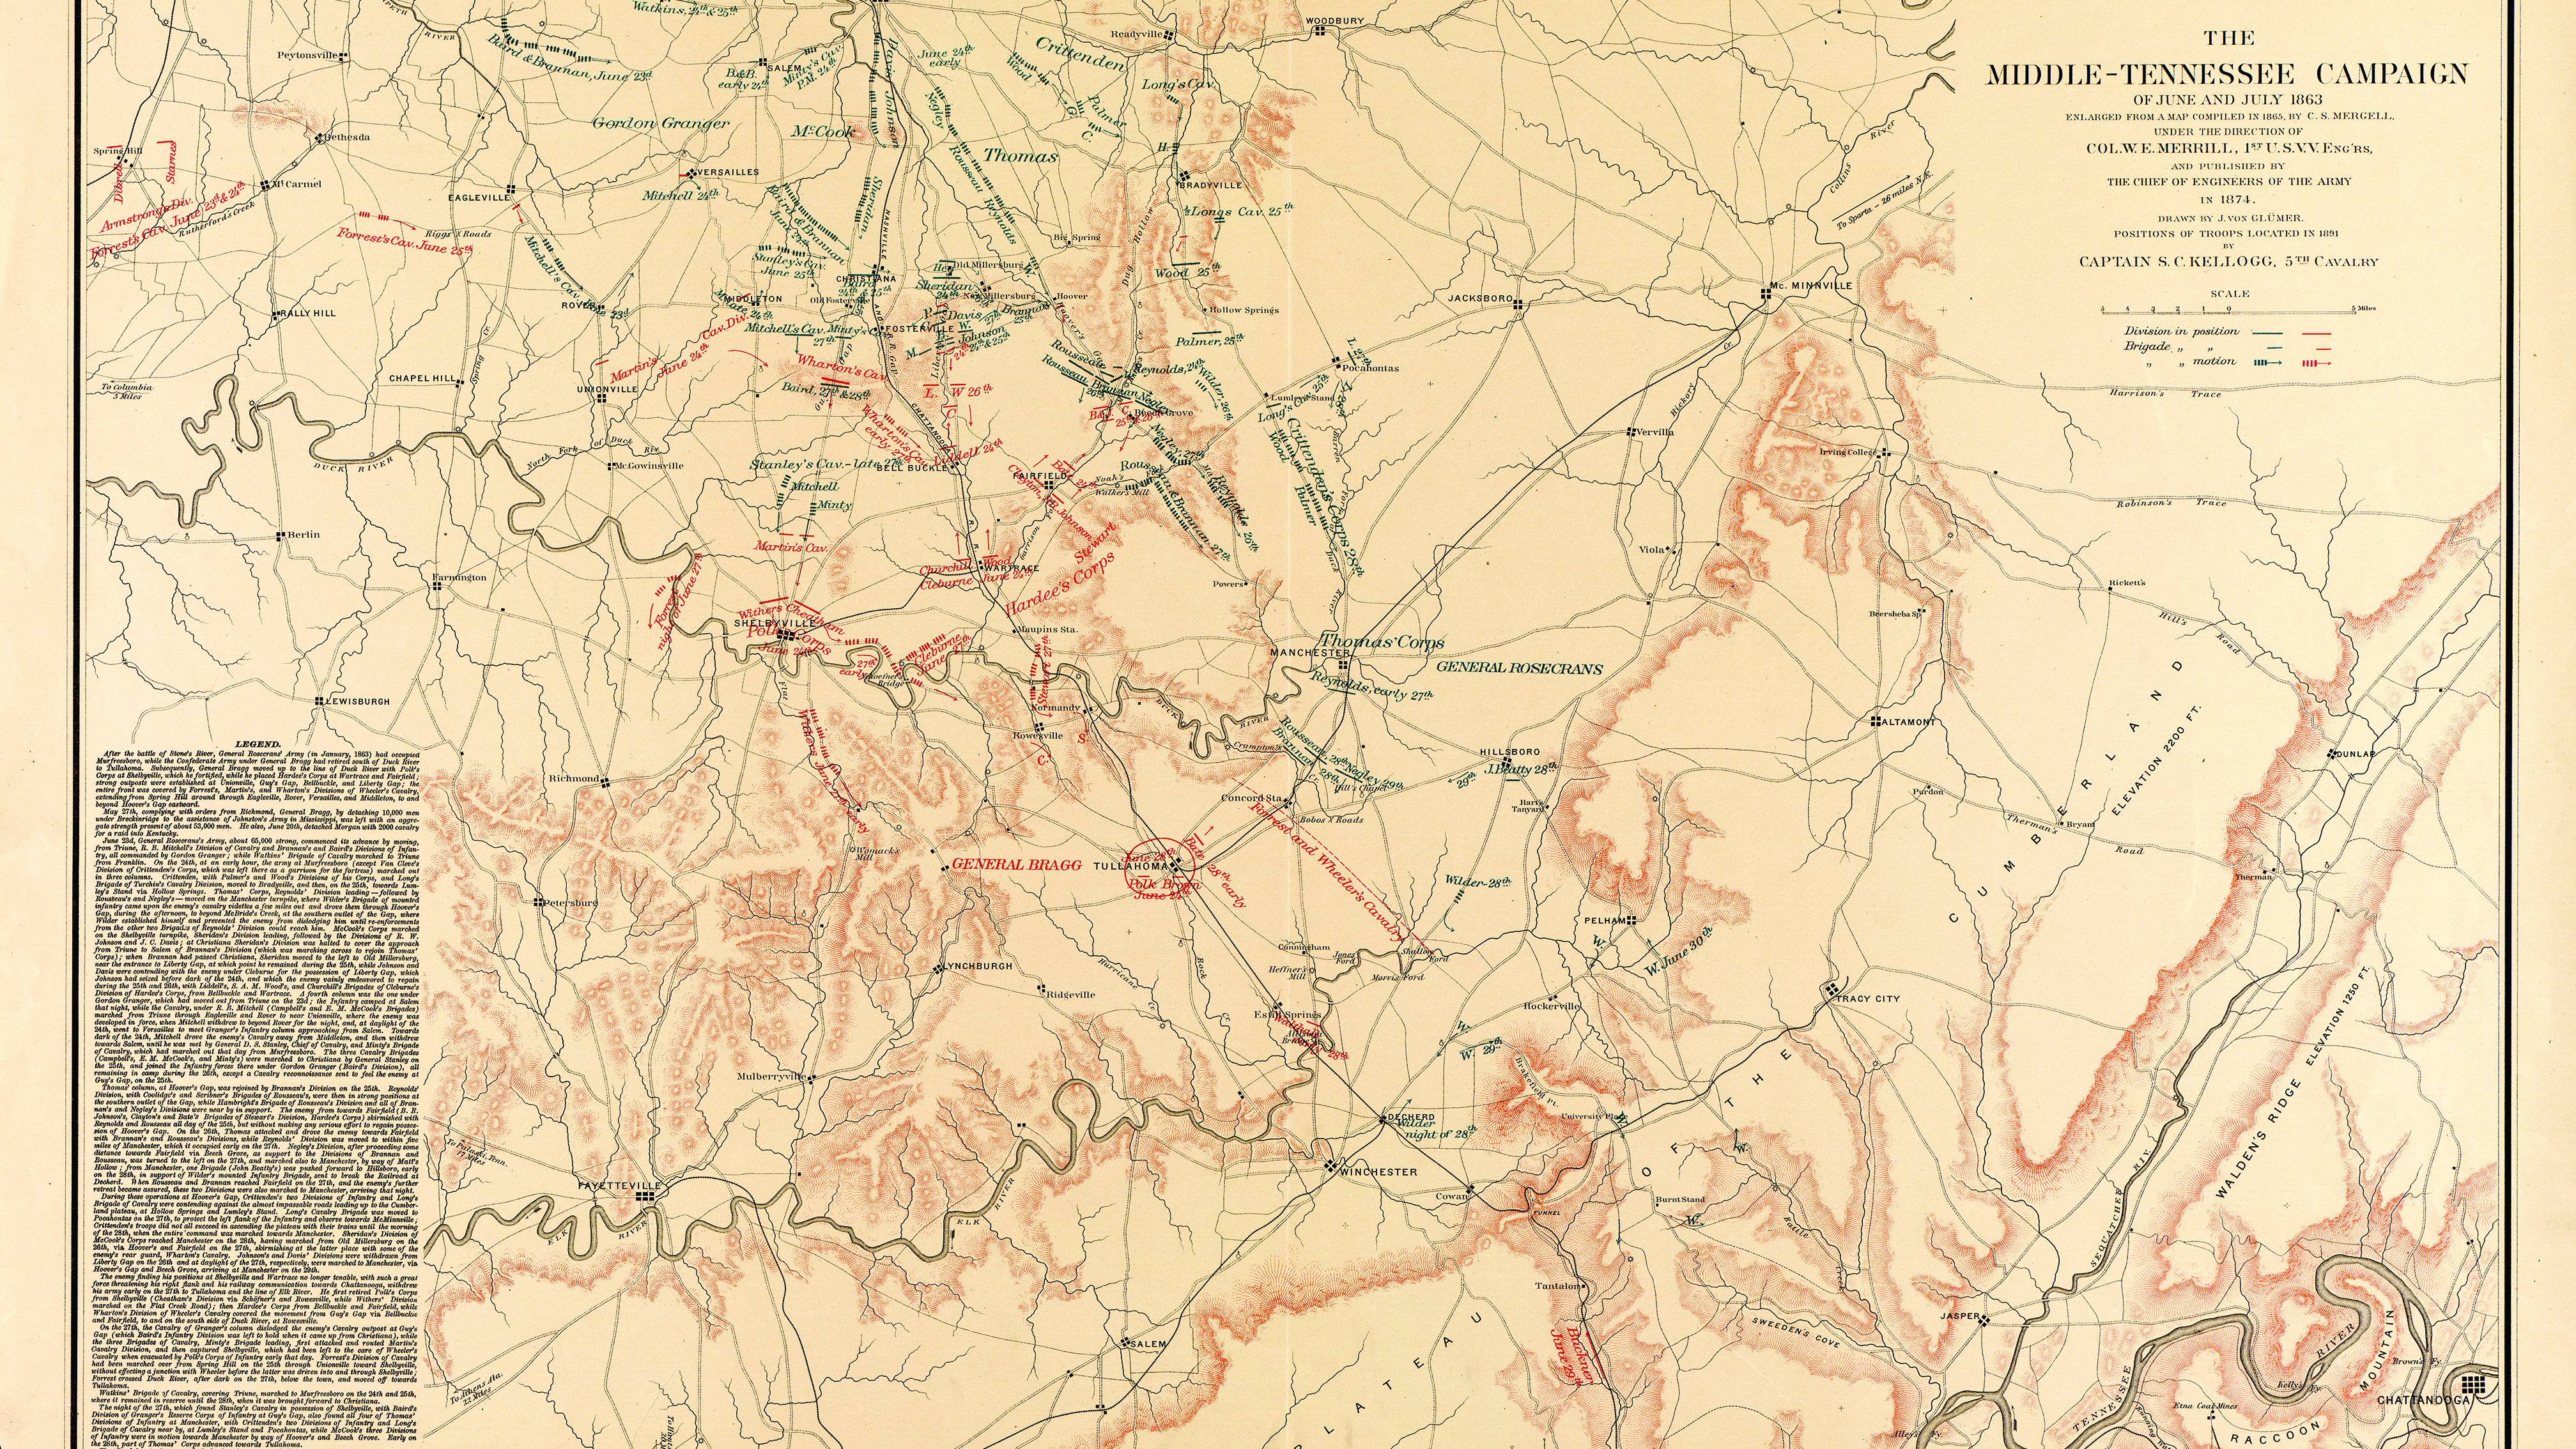 This map of Middle Tennessee is a prime example of the care and intricacy Merrill invested in each of his maps. Lead pencils were used for any data transferred from other maps; corrections were made only with colored pencils. (United States Corps of Engineers/Library of Congress)